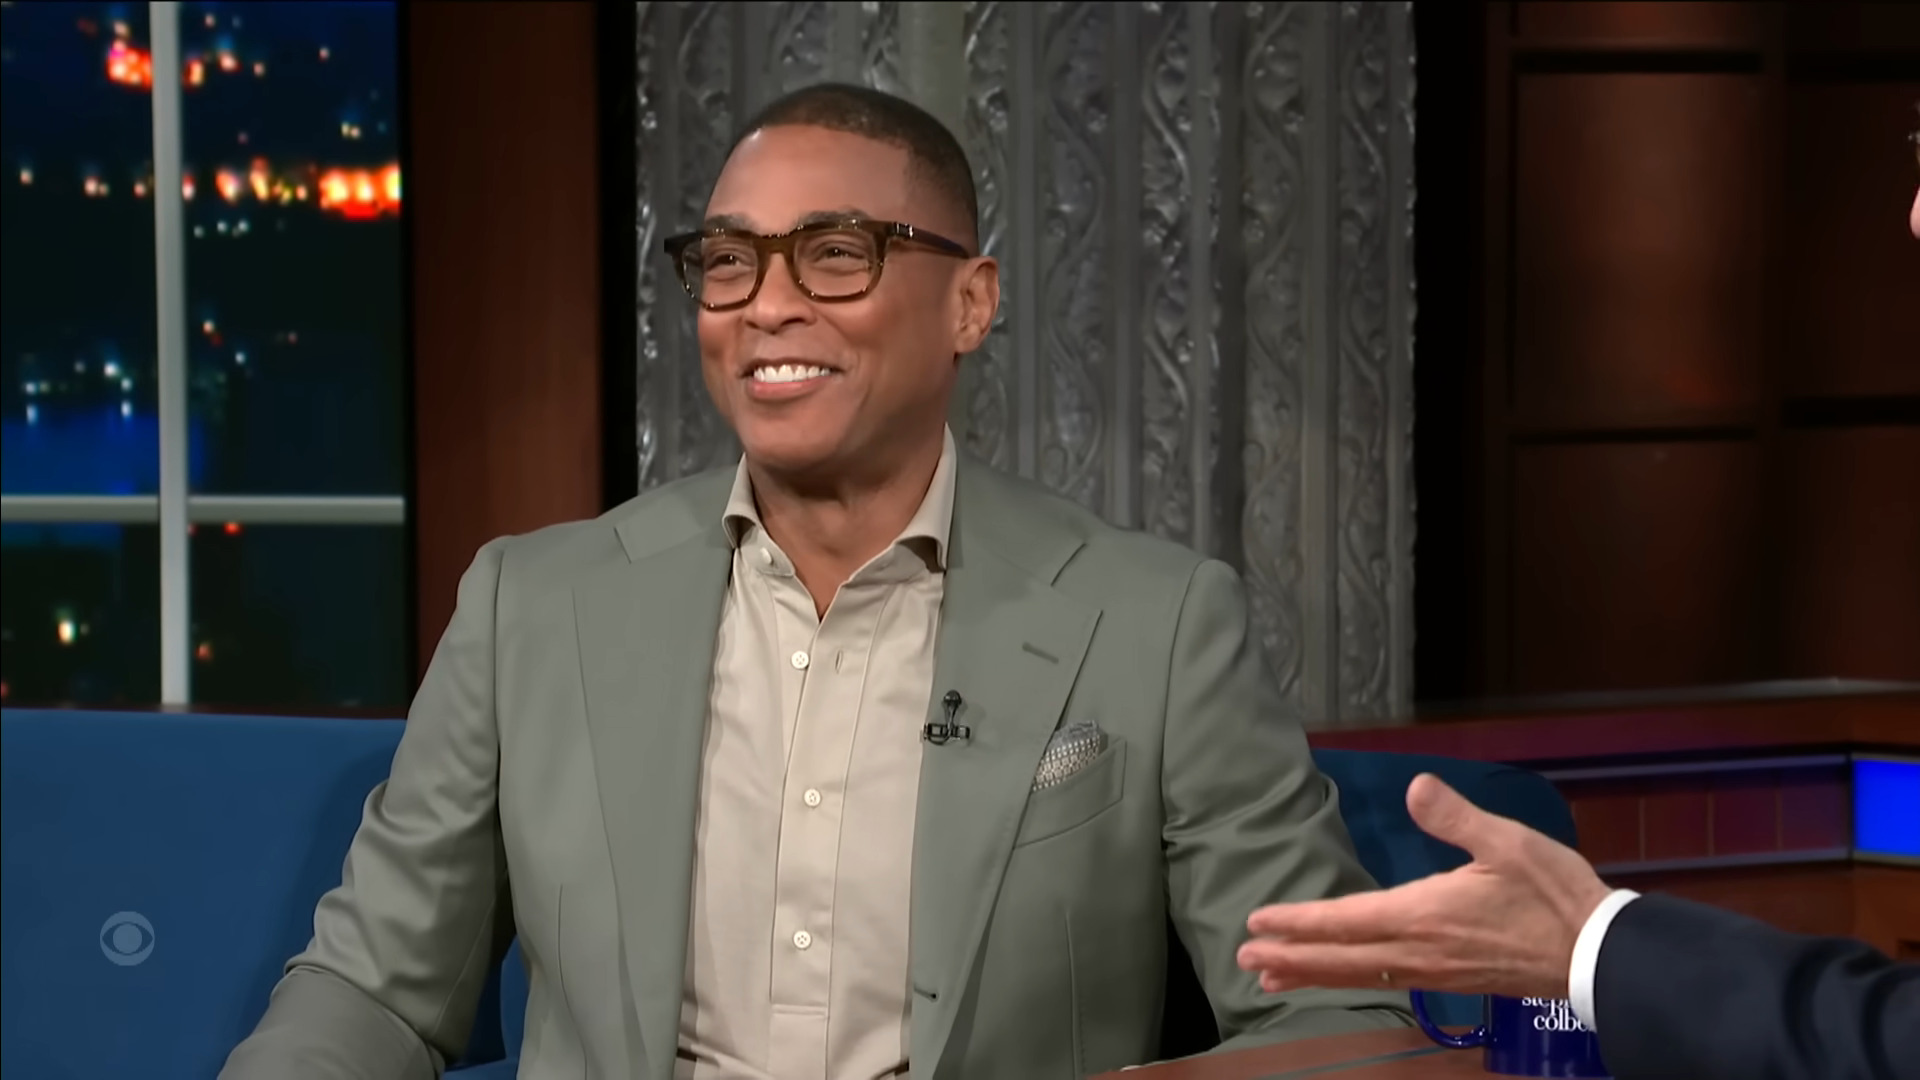 Don Lemon stops by The Late Show with Stephen Colbert